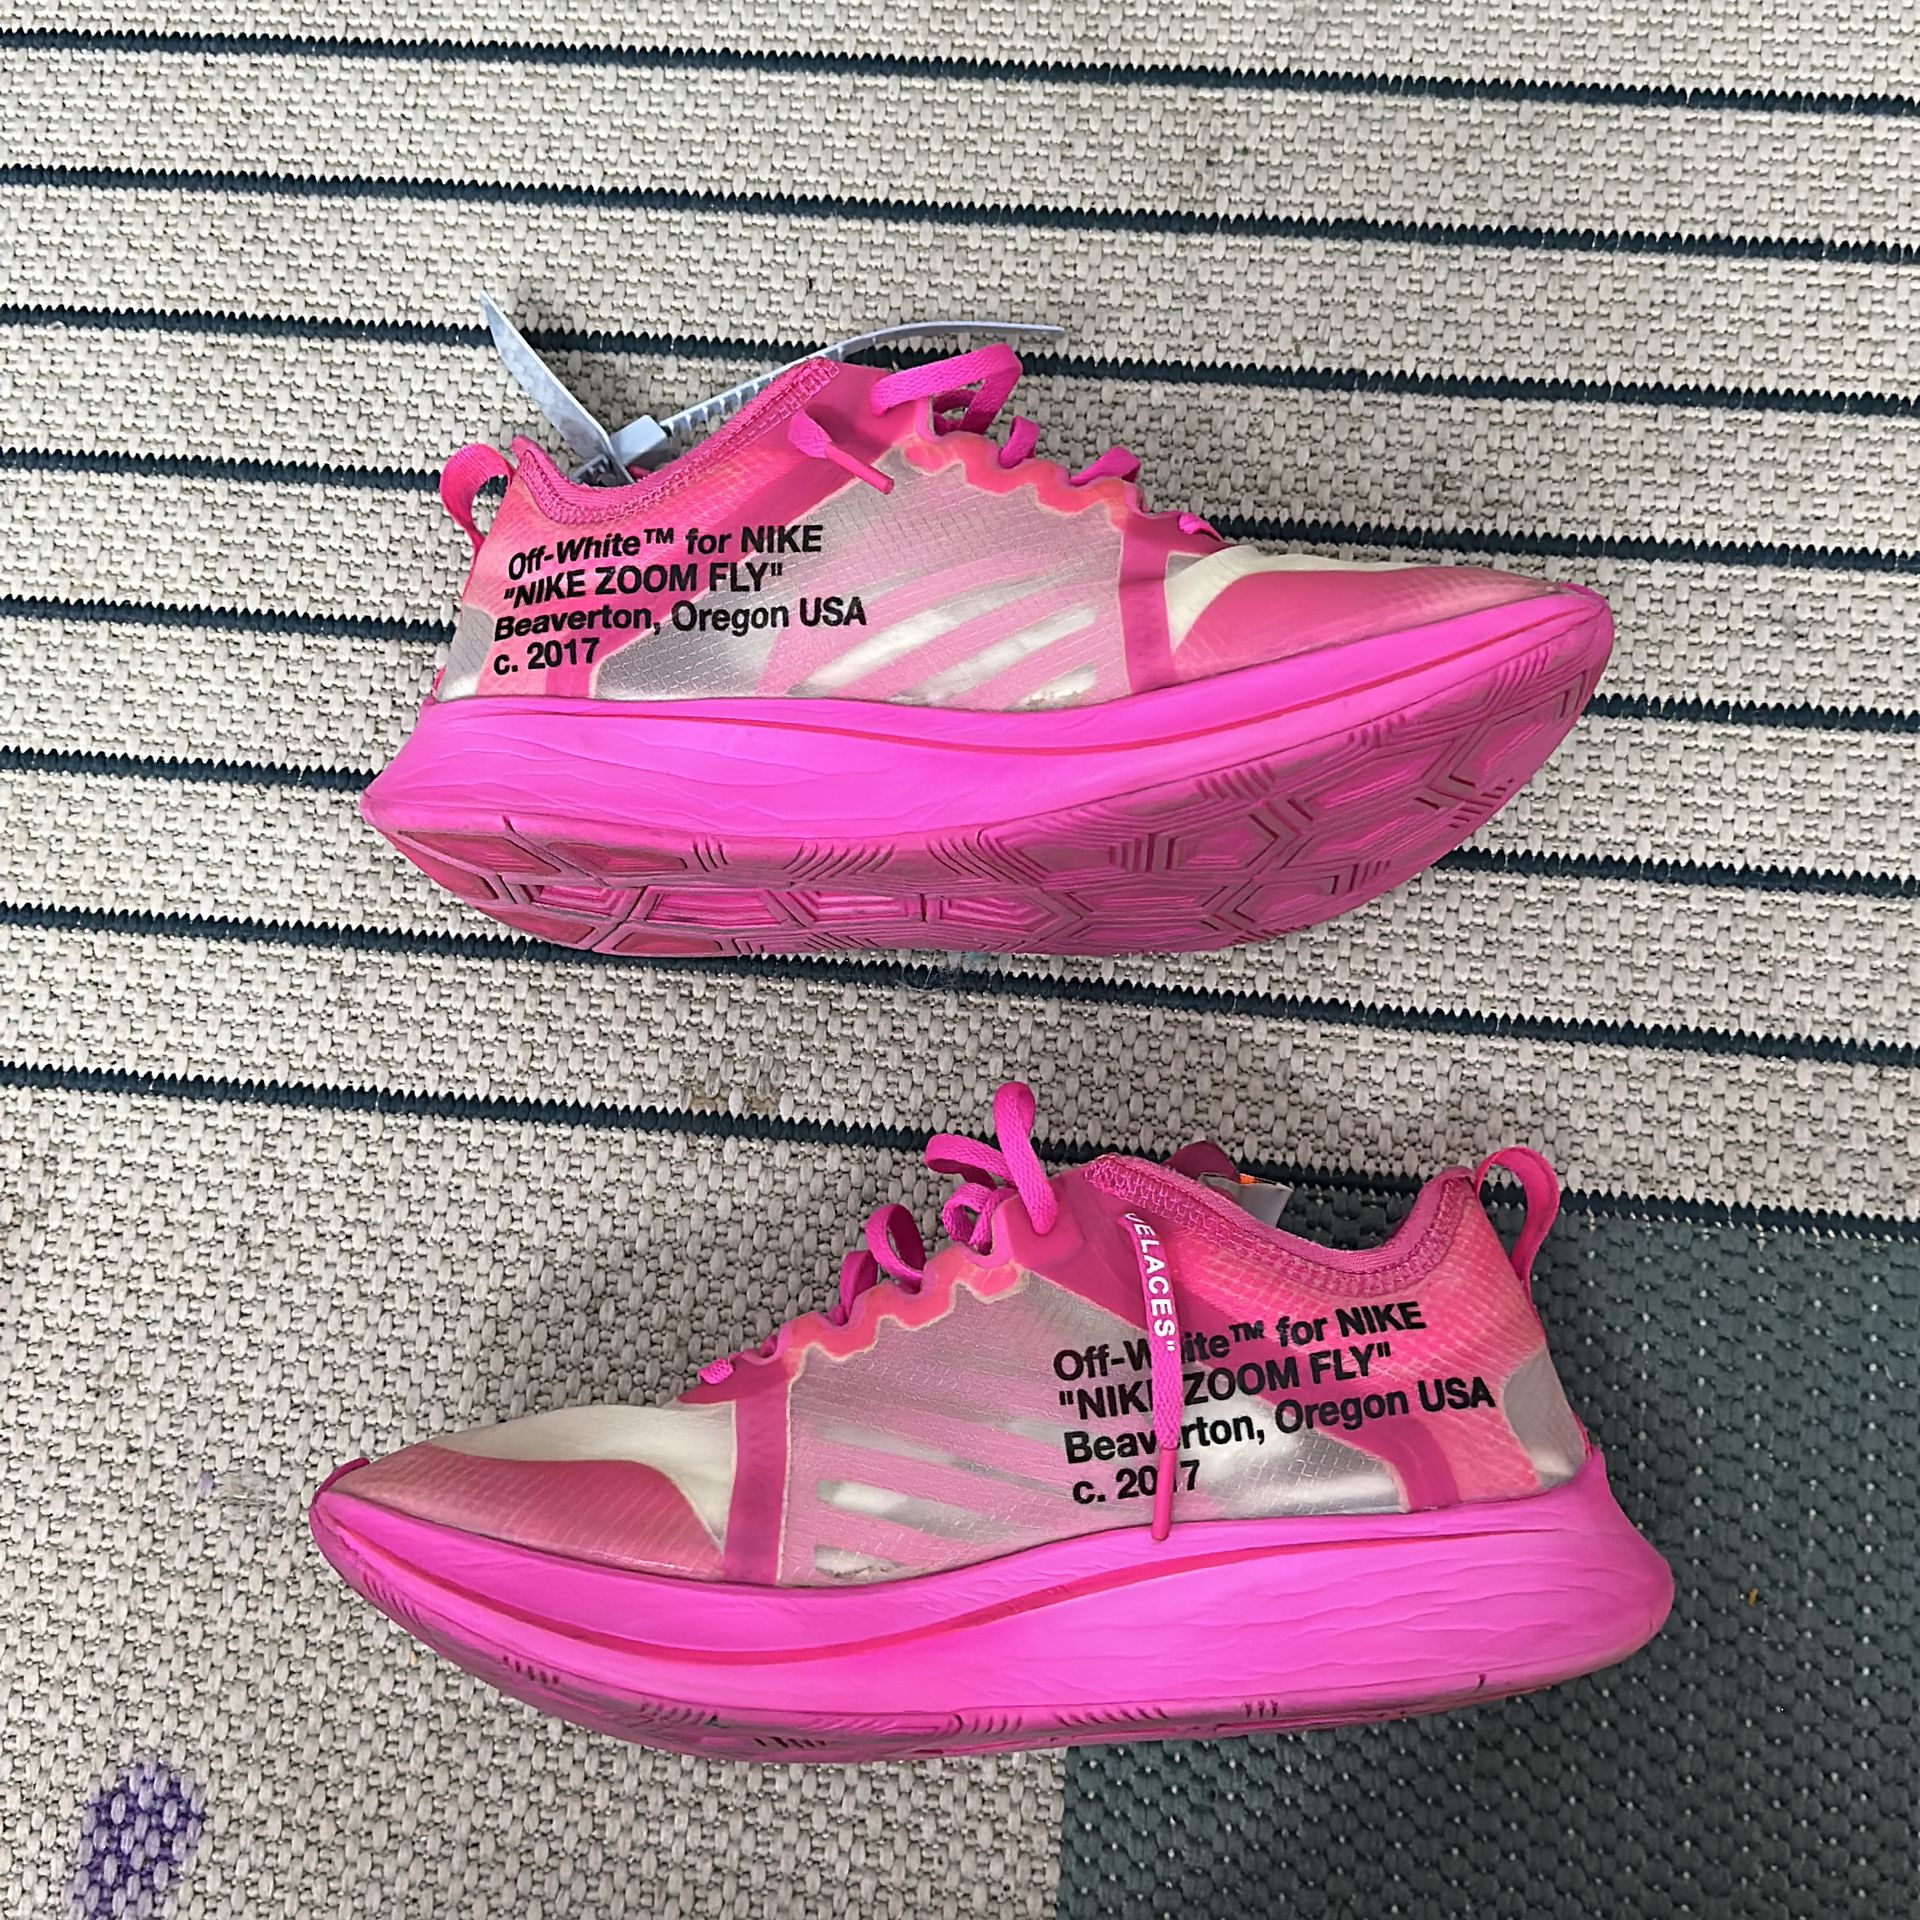 Nike OFF-WHITE x Zoom Fly SP 'Tulip Pink'